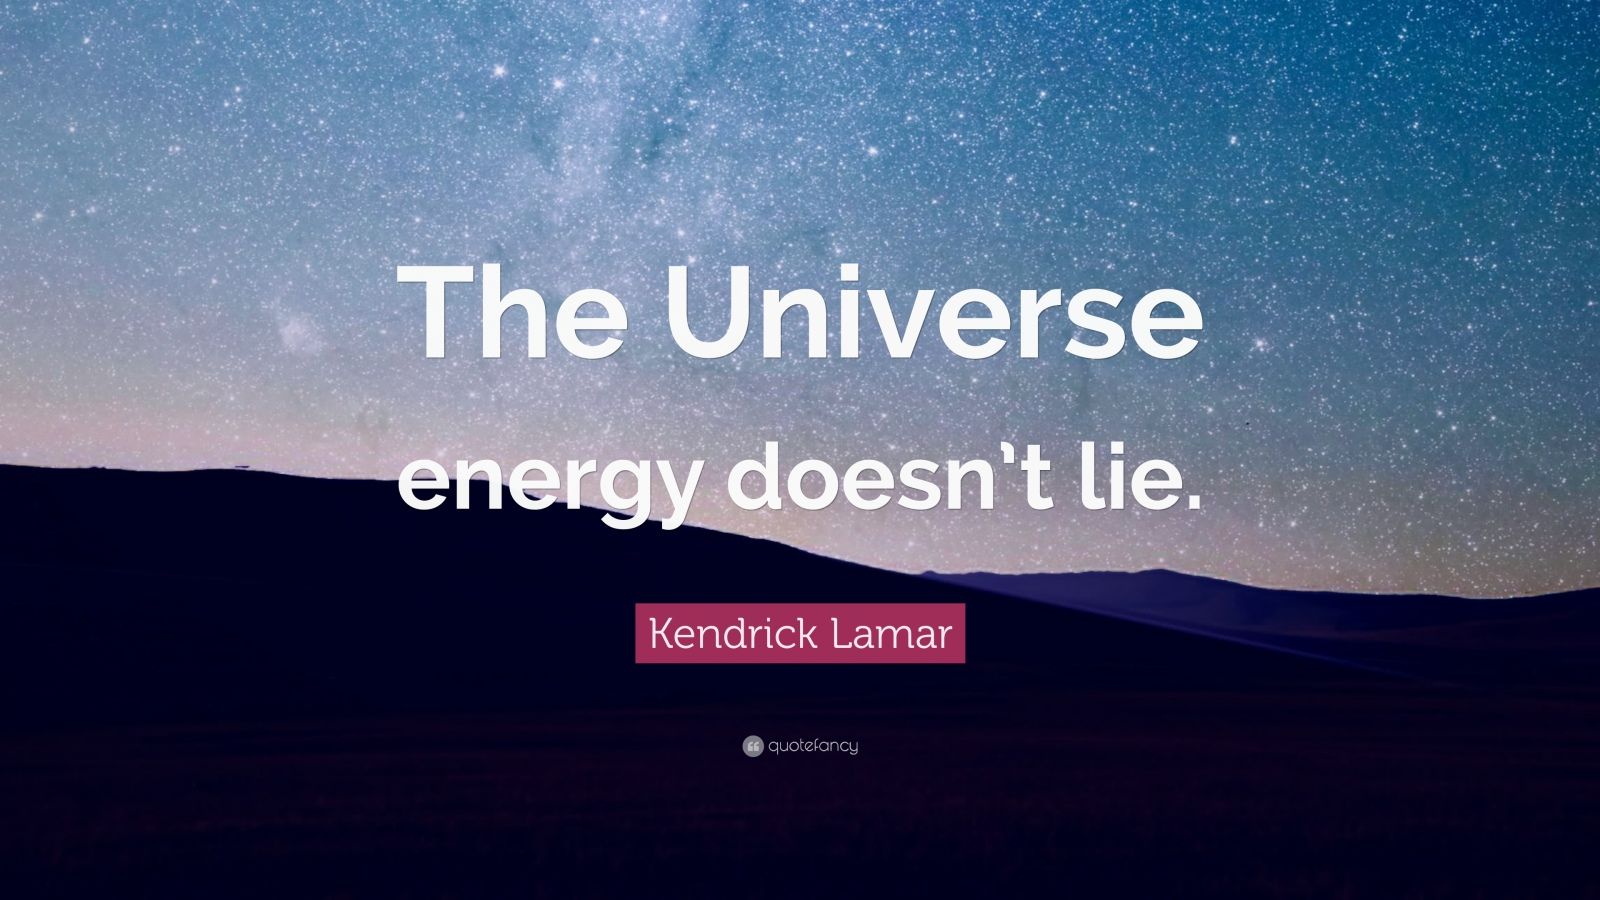 Kendrick Lamar Quote “The Universe energy doesn’t lie